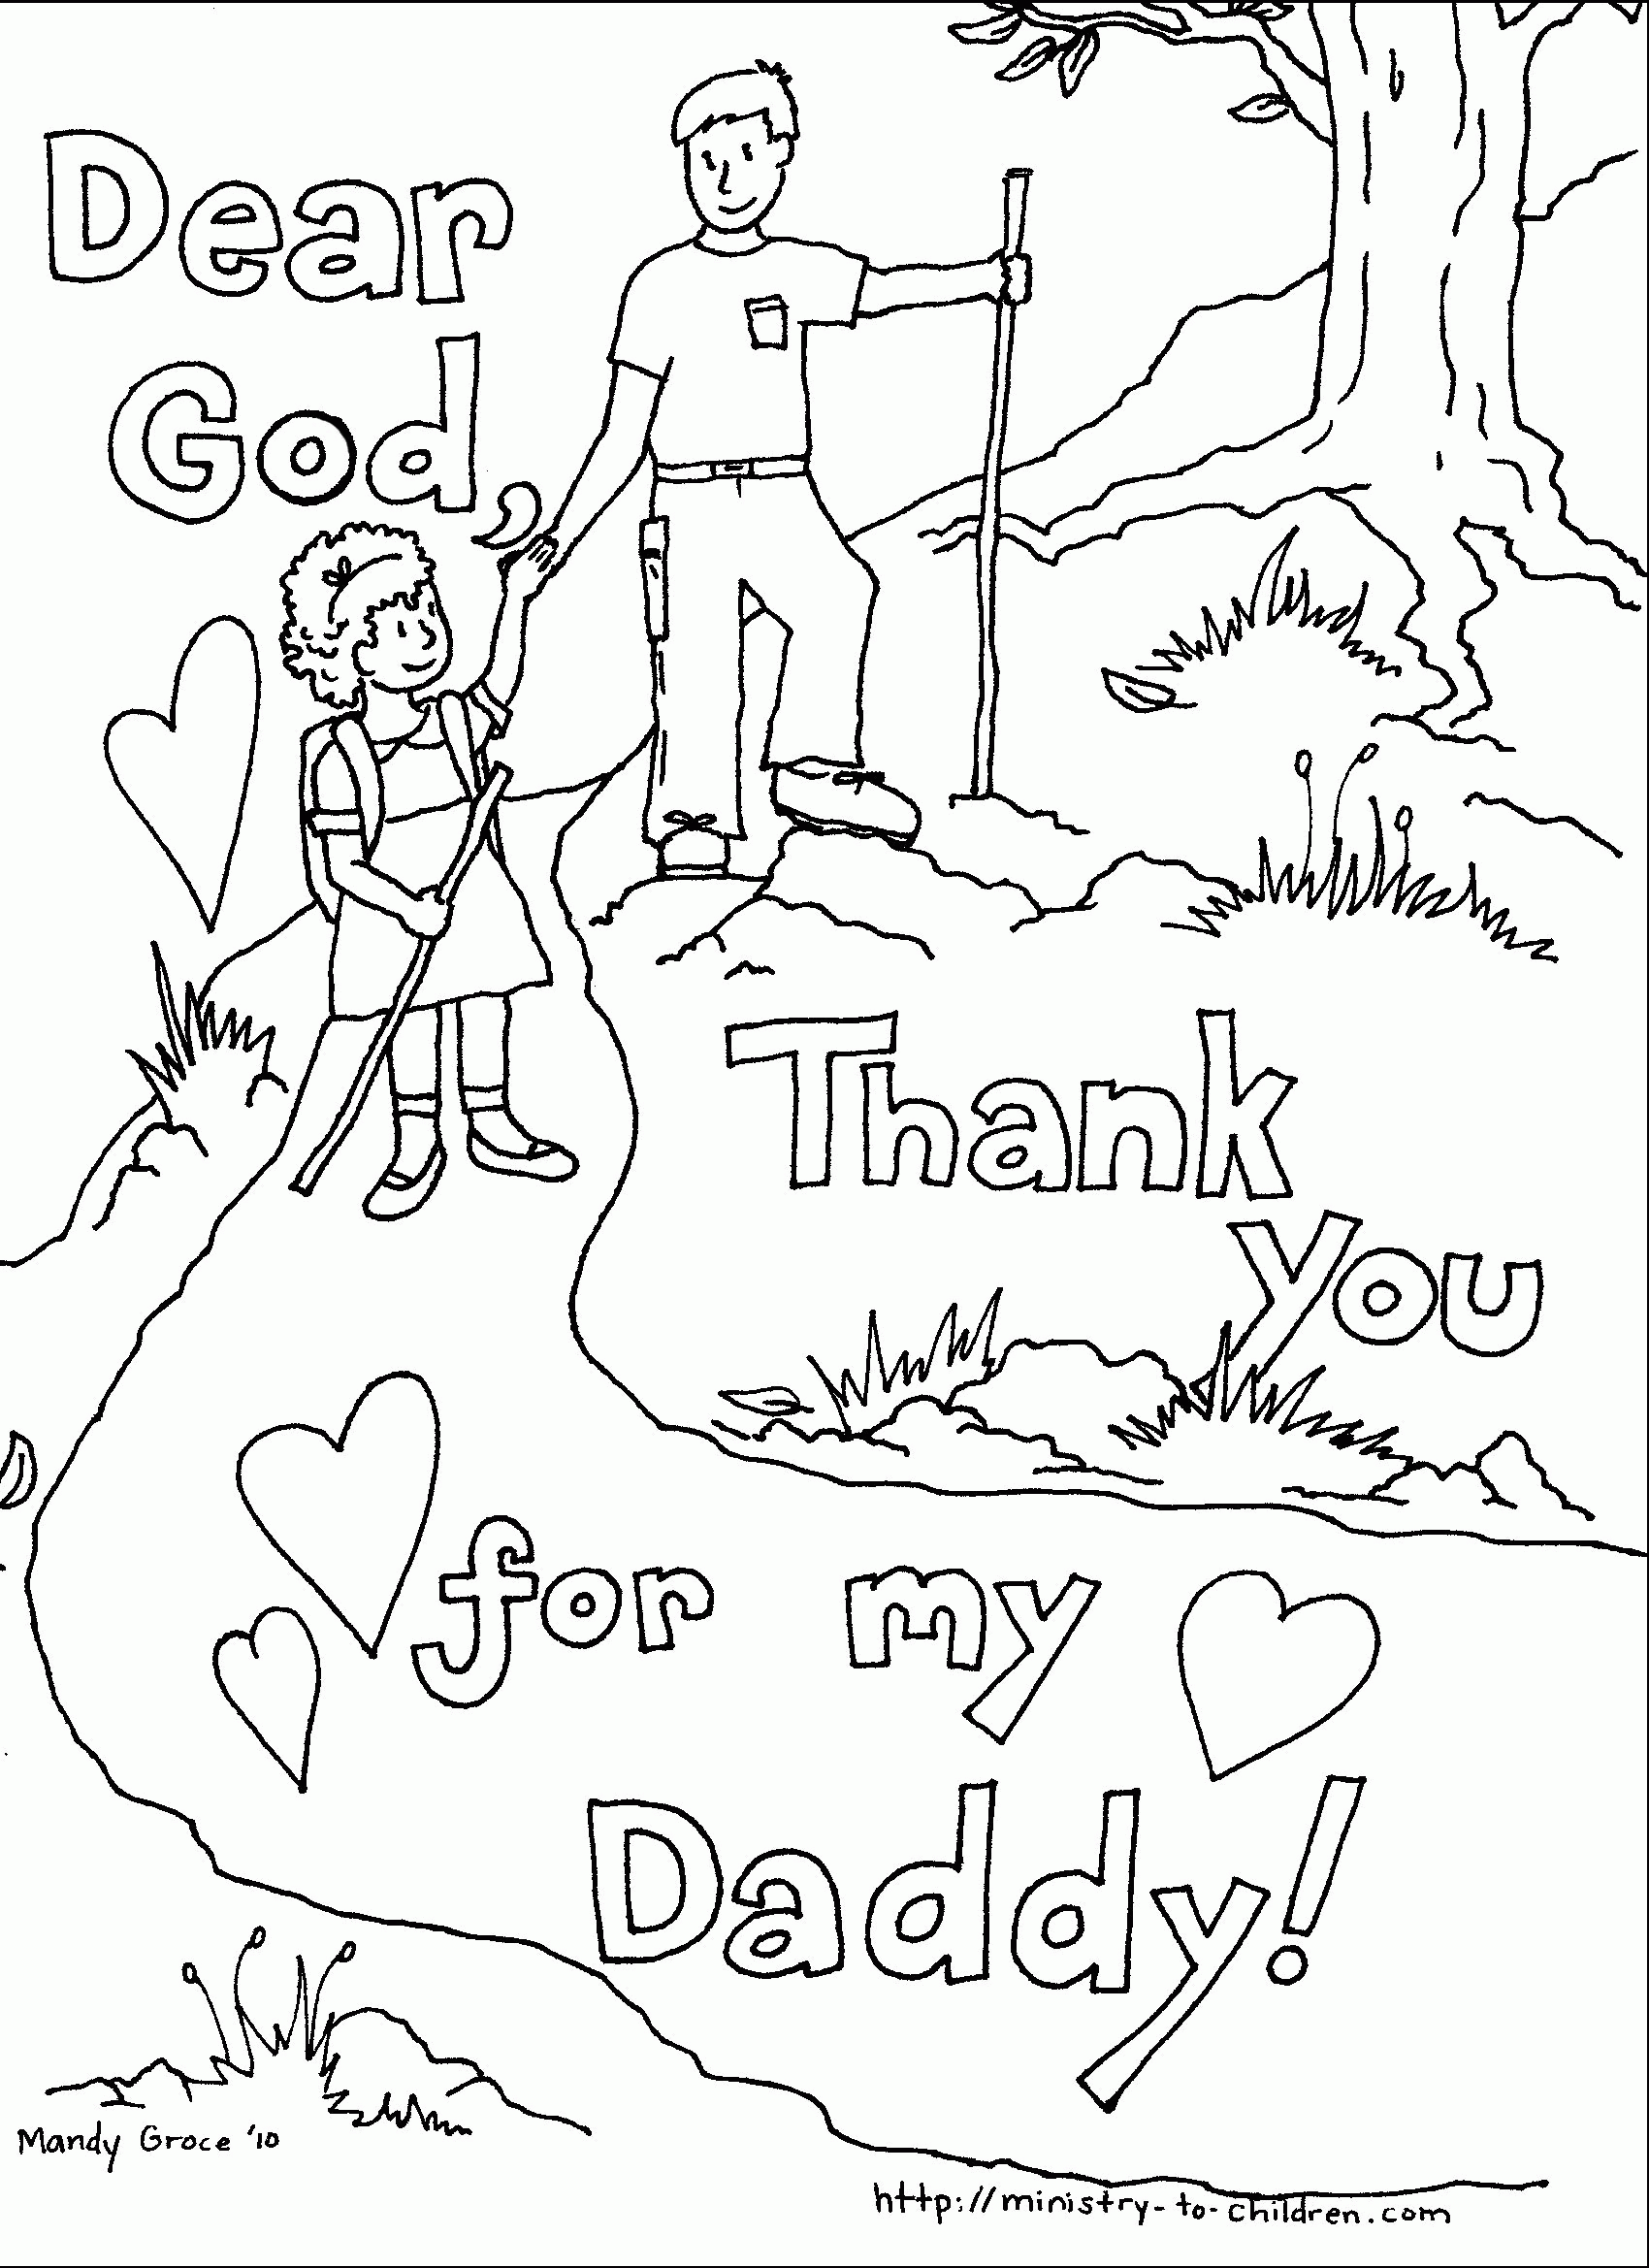 Free Father's Day Coloring Pages